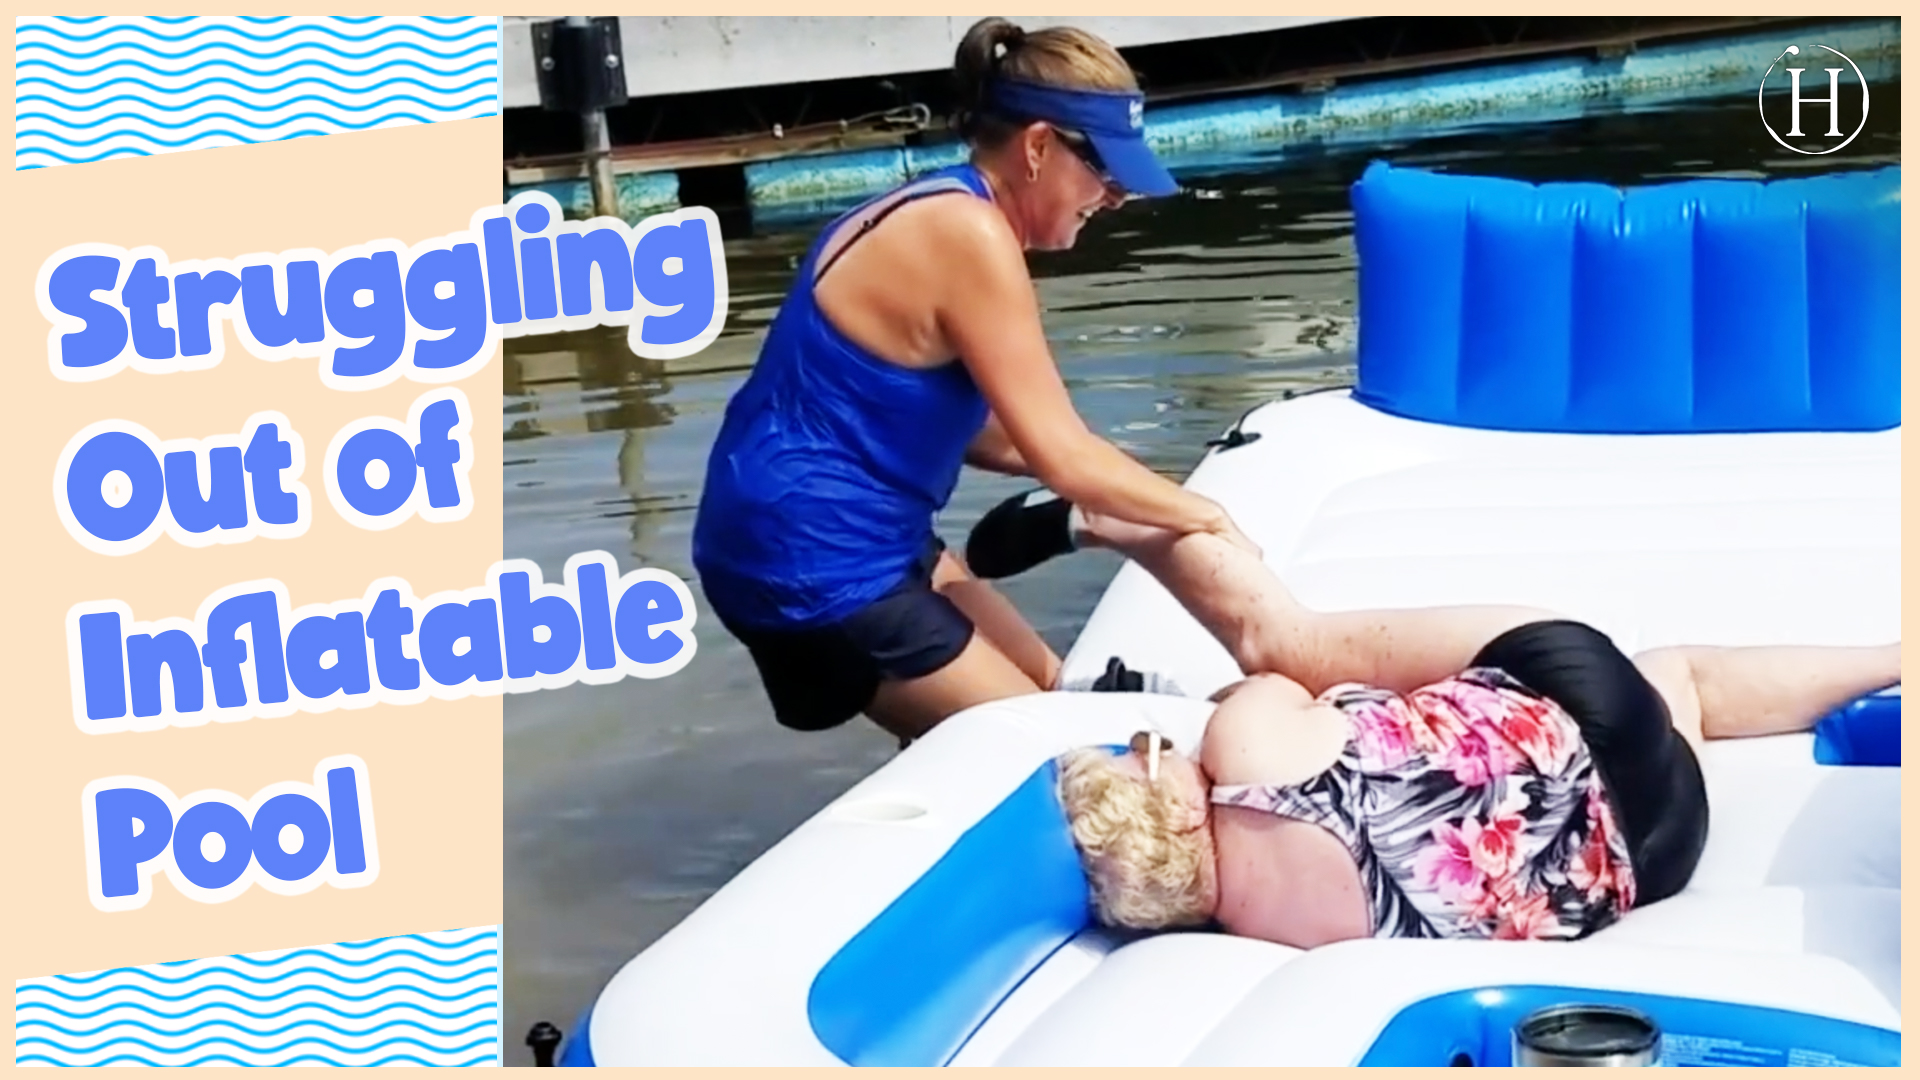 Women Struggle Out of Inflatable Pool | Humanity Life